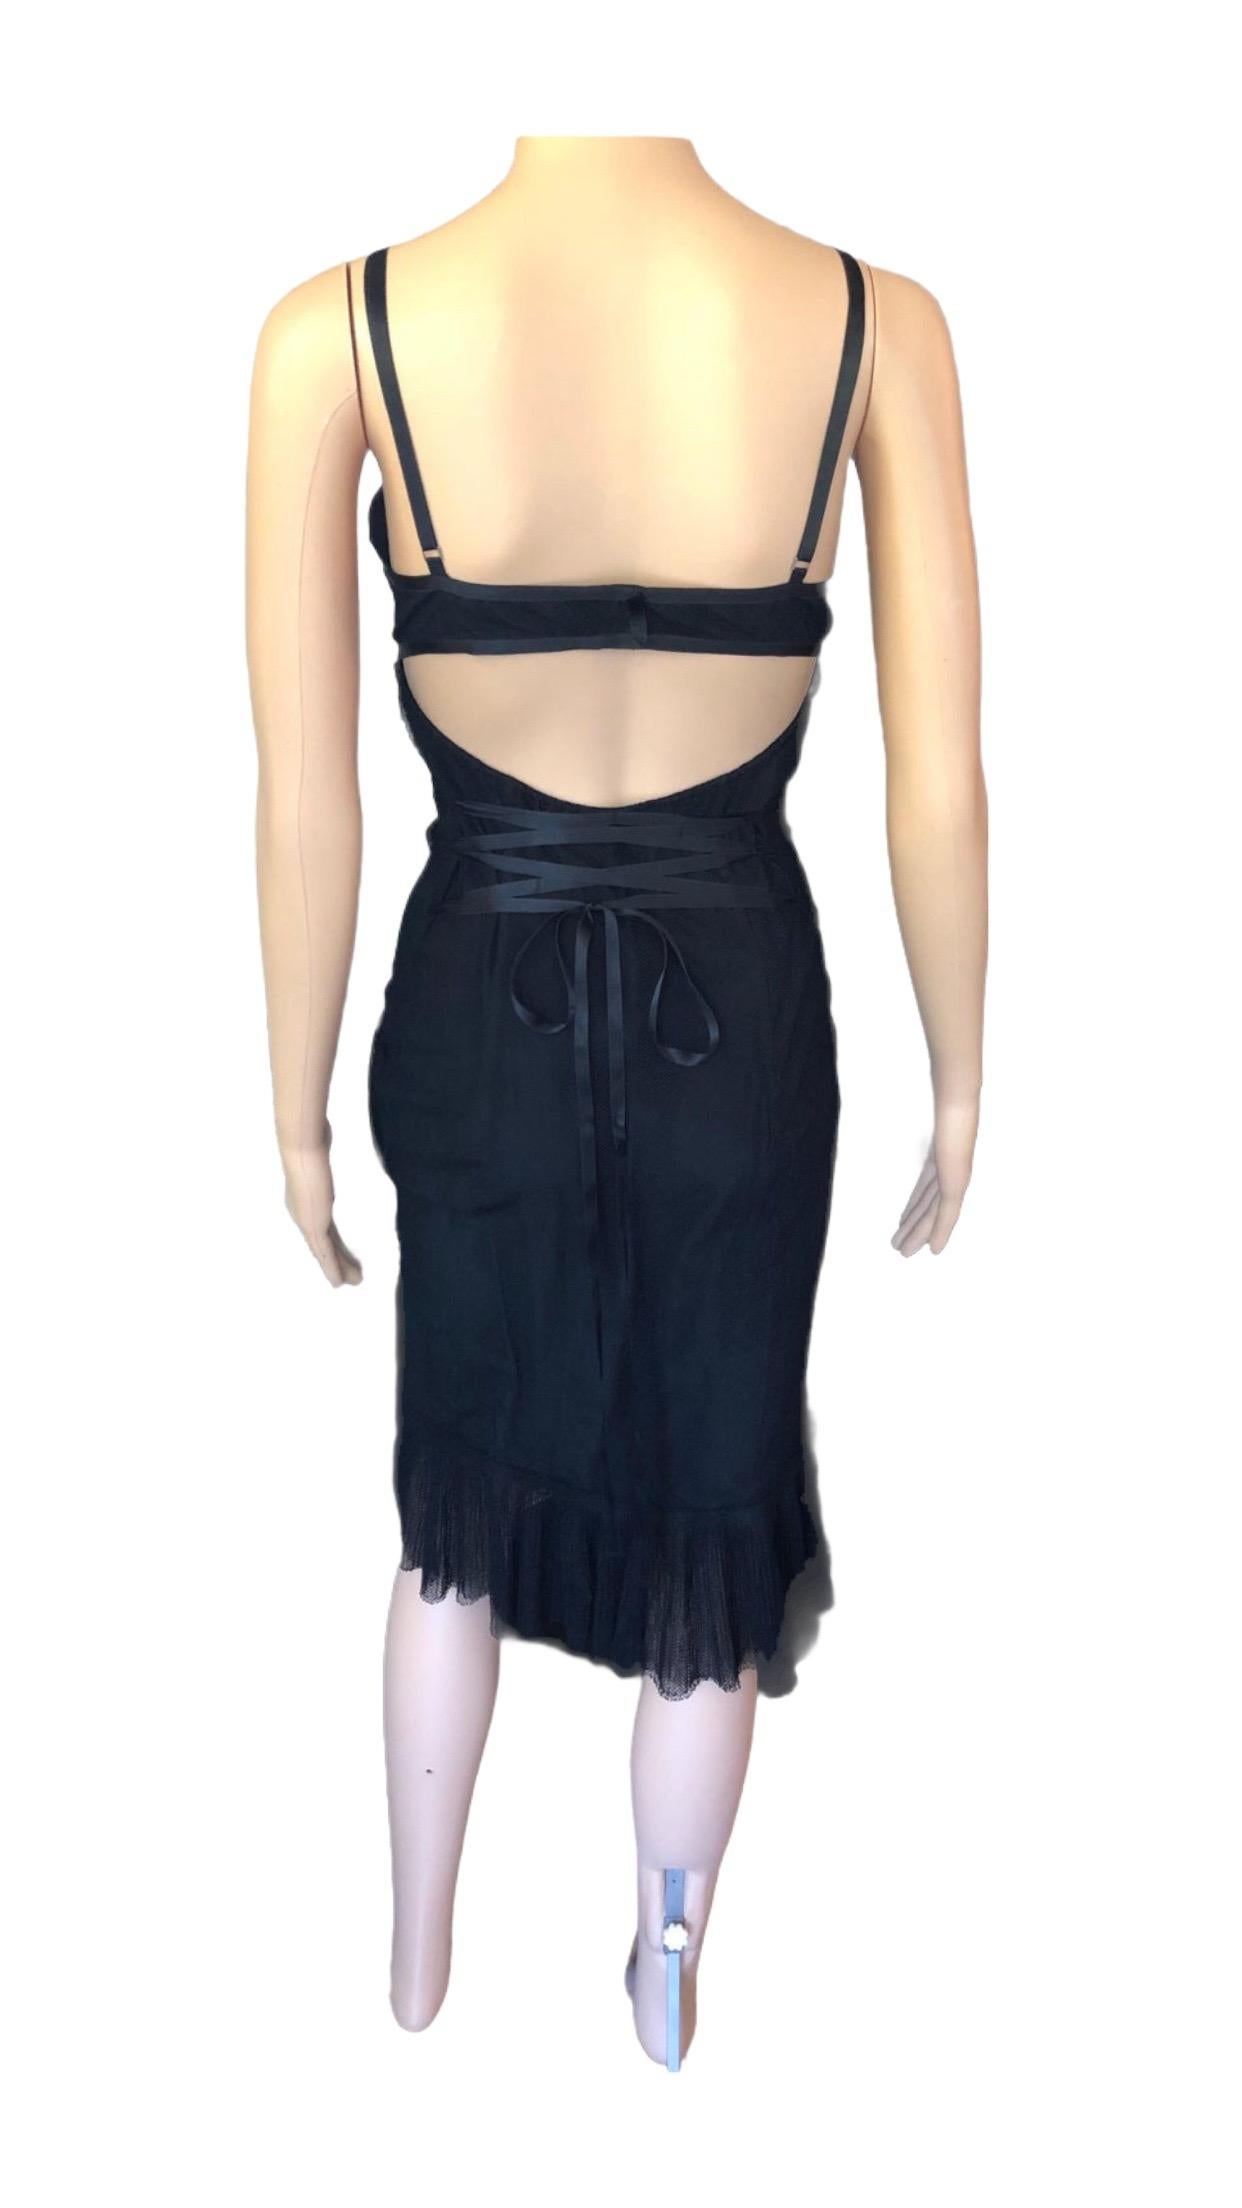 Gucci by Tom Ford F/W 2001 Cutout Back Mesh Black Dress For Sale 1